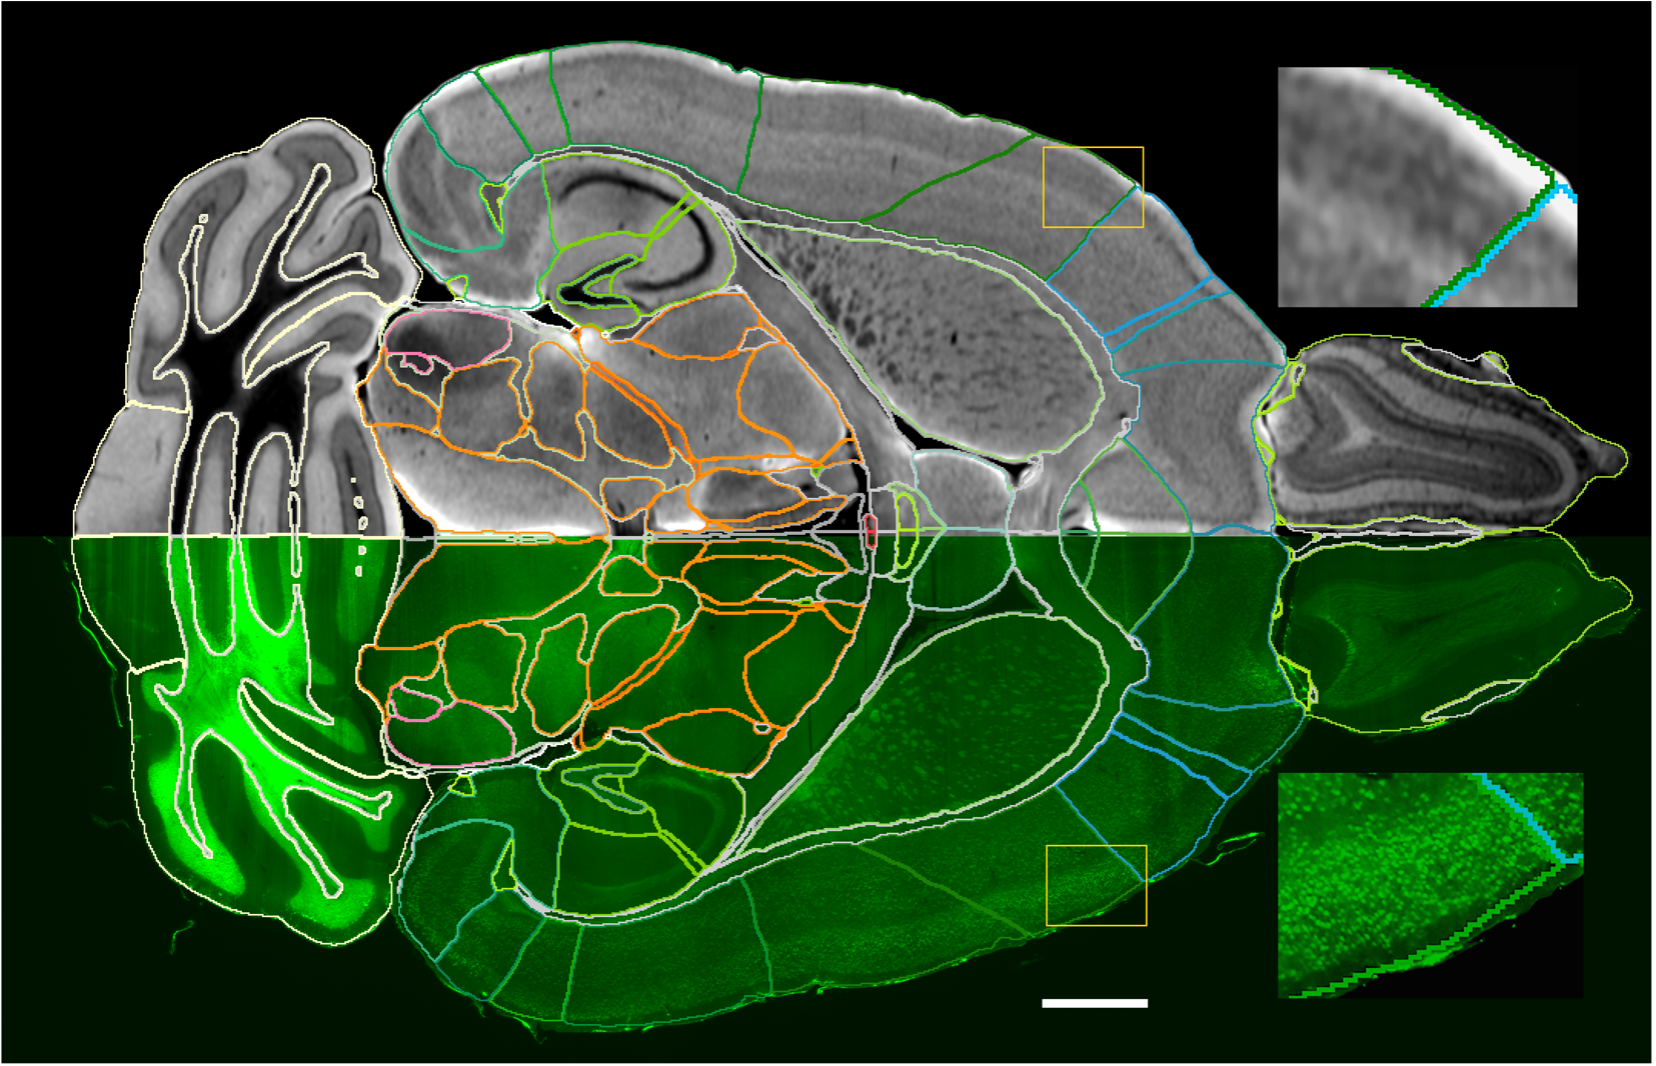 Image of technology mapping overlay over mouse brain (Source: CC via NeuroImage. https://www.sciencedirect.com/science/article/pii/S1053811921007436)